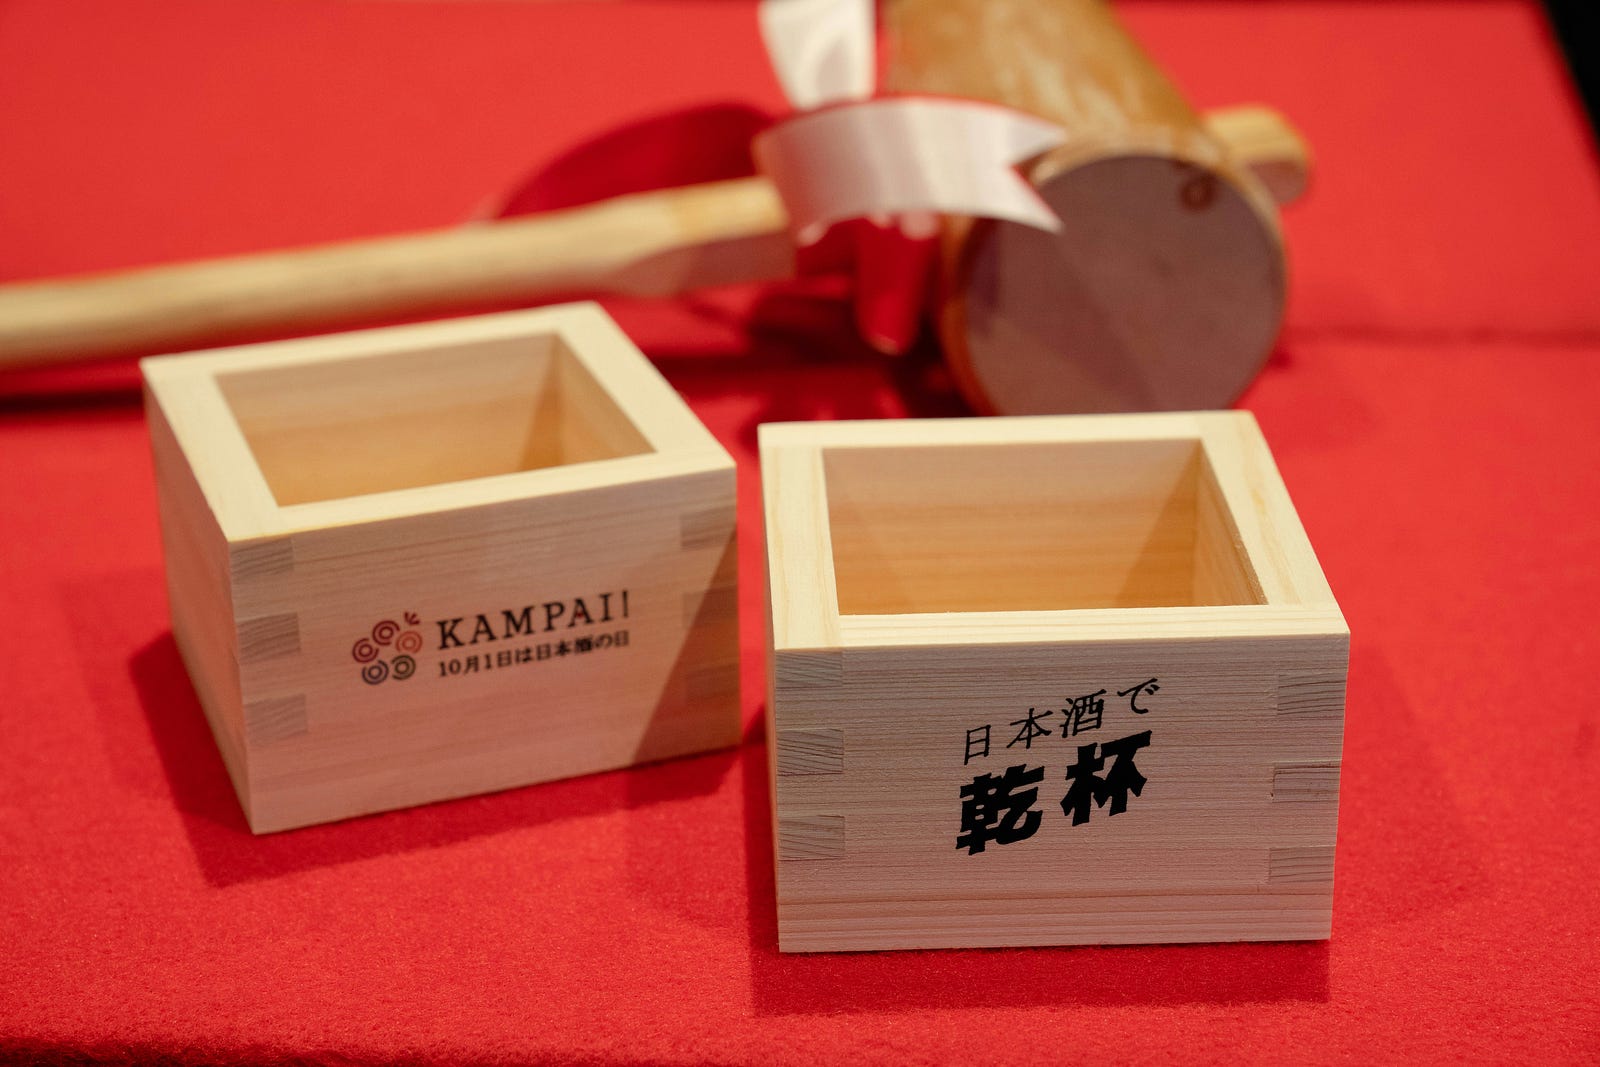 Two small wooden boxes for sake.